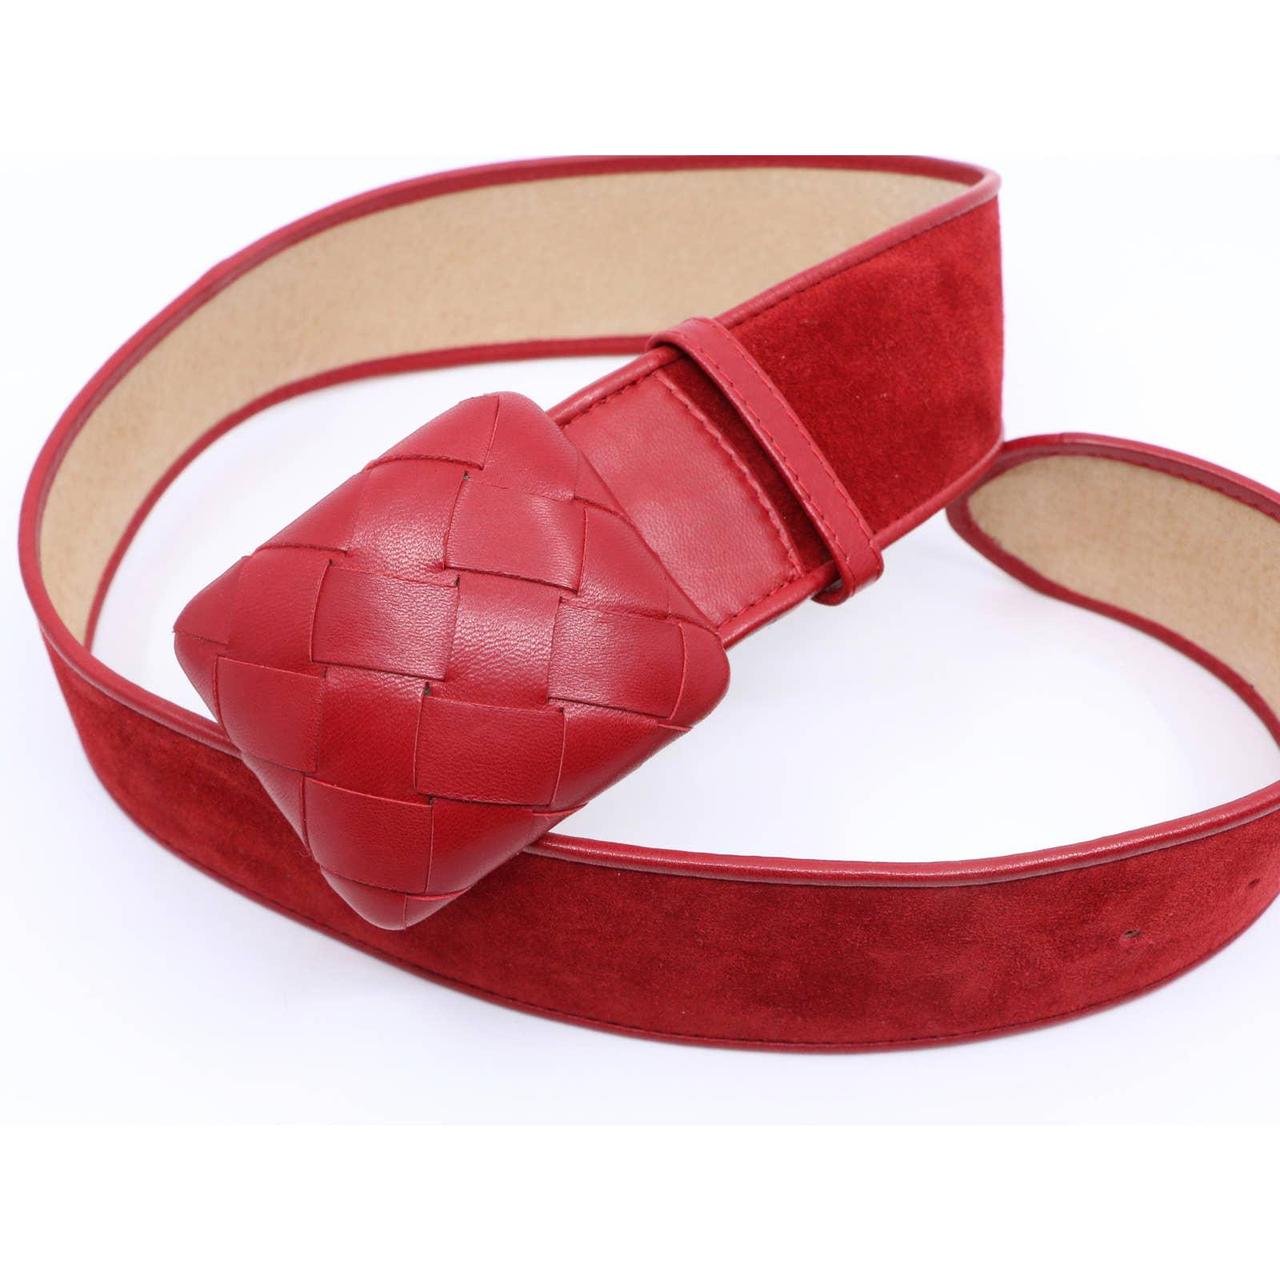 Product Image 1 - Beautifully crafted statement belt by